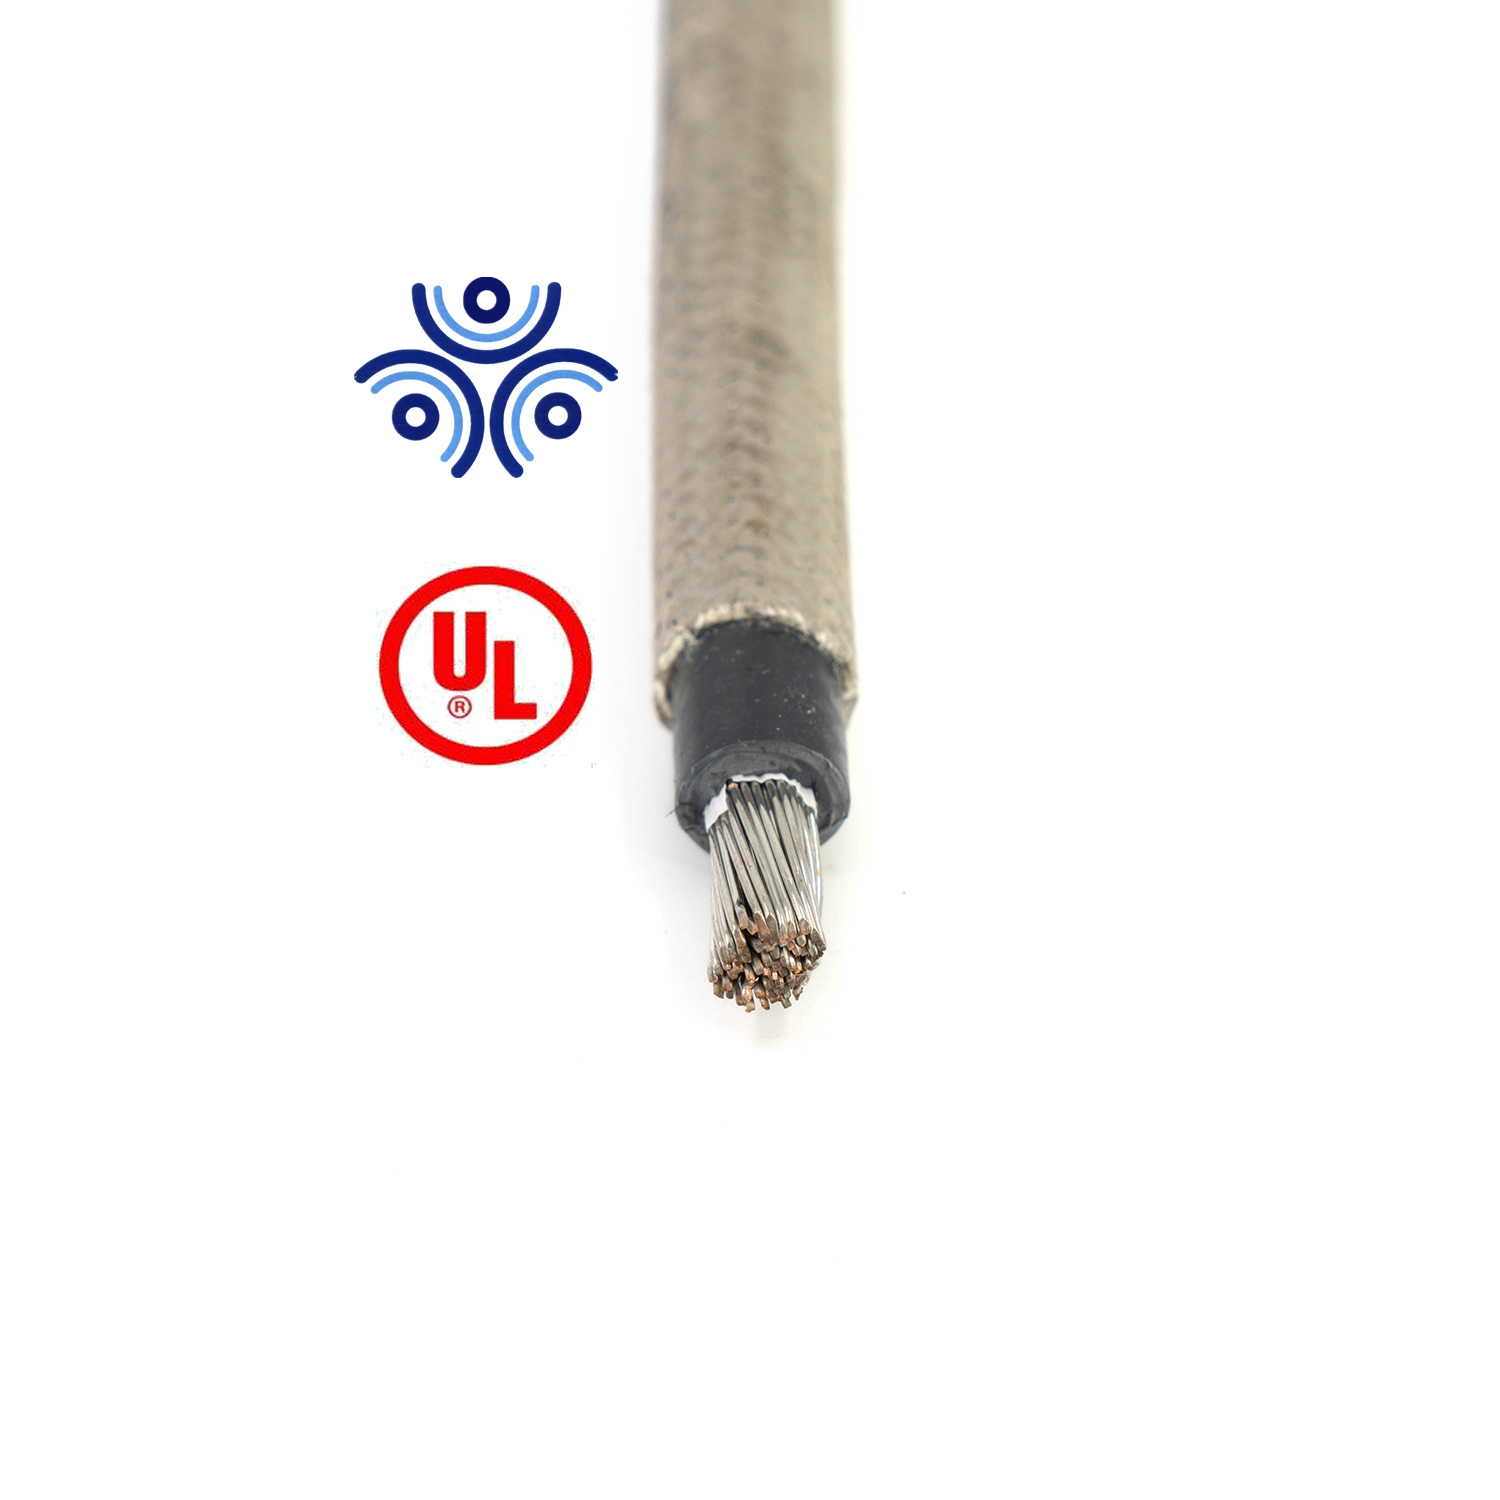 Ht Cables Tinned Copper Wire Rru Power 5g Telecom Cable